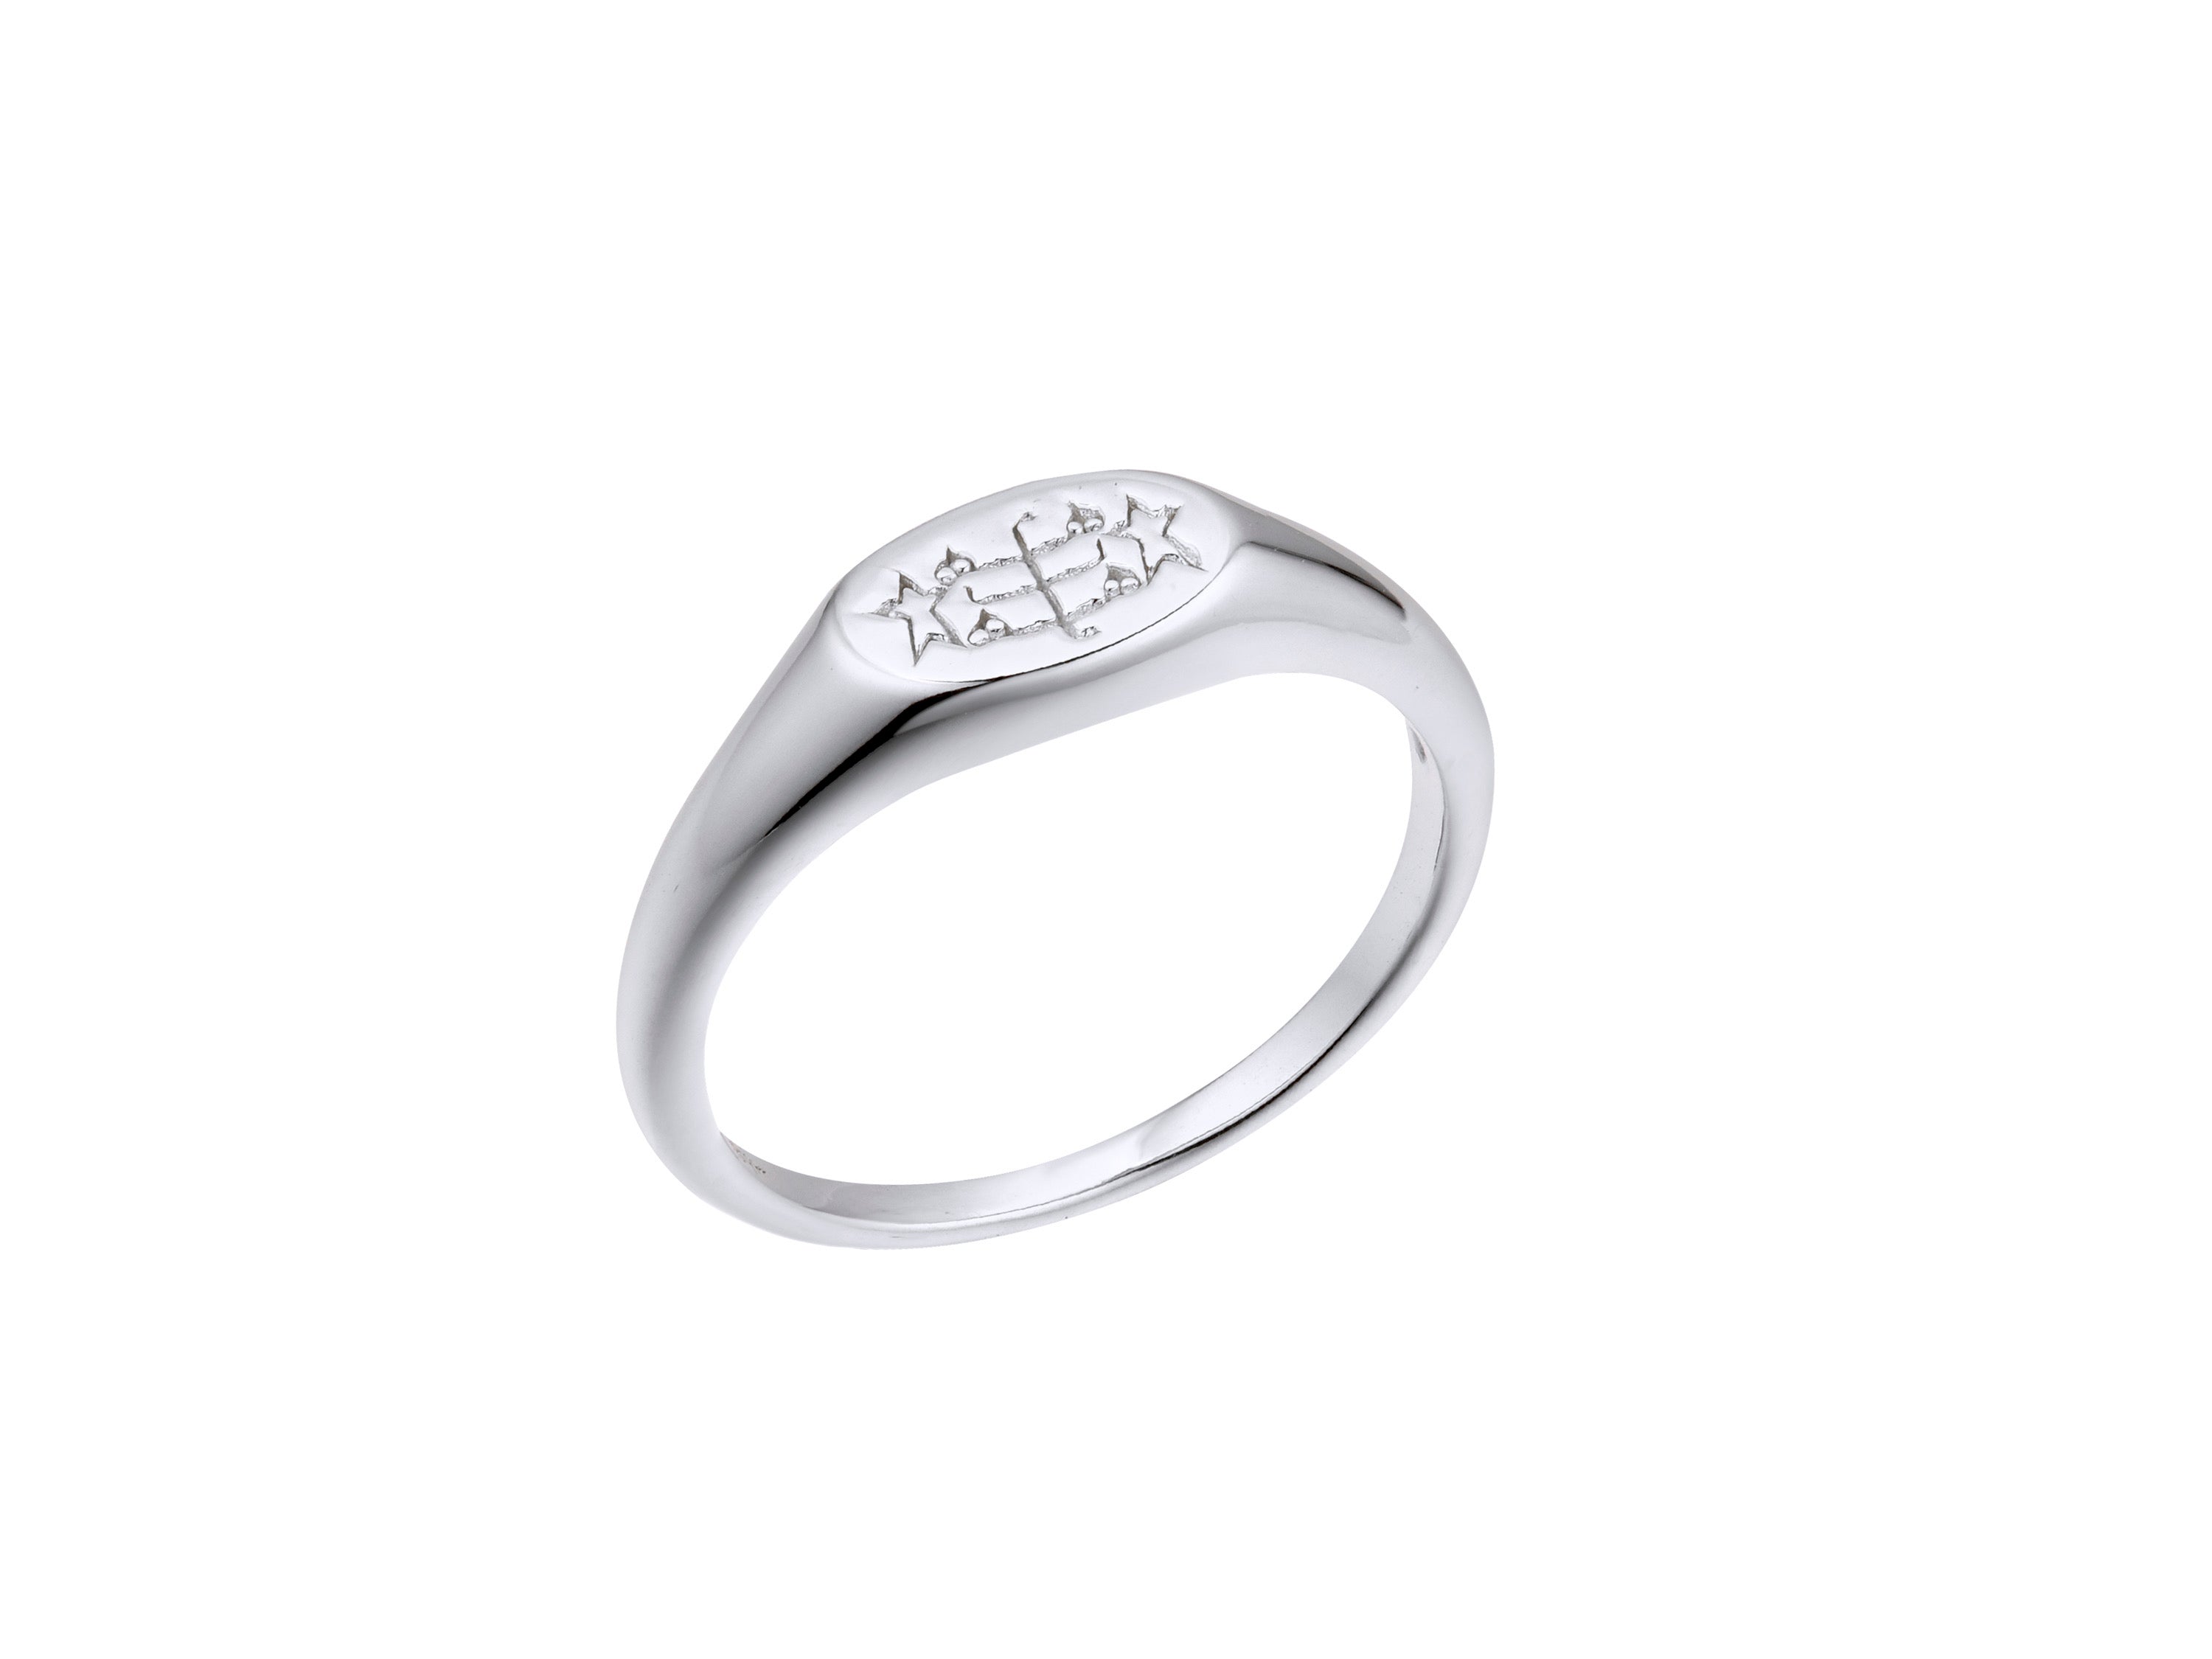 plain and simple silver bahai ring with ringstone symbol engraved on a horizontal oval signet ring for men, women, or kids on a plain white background